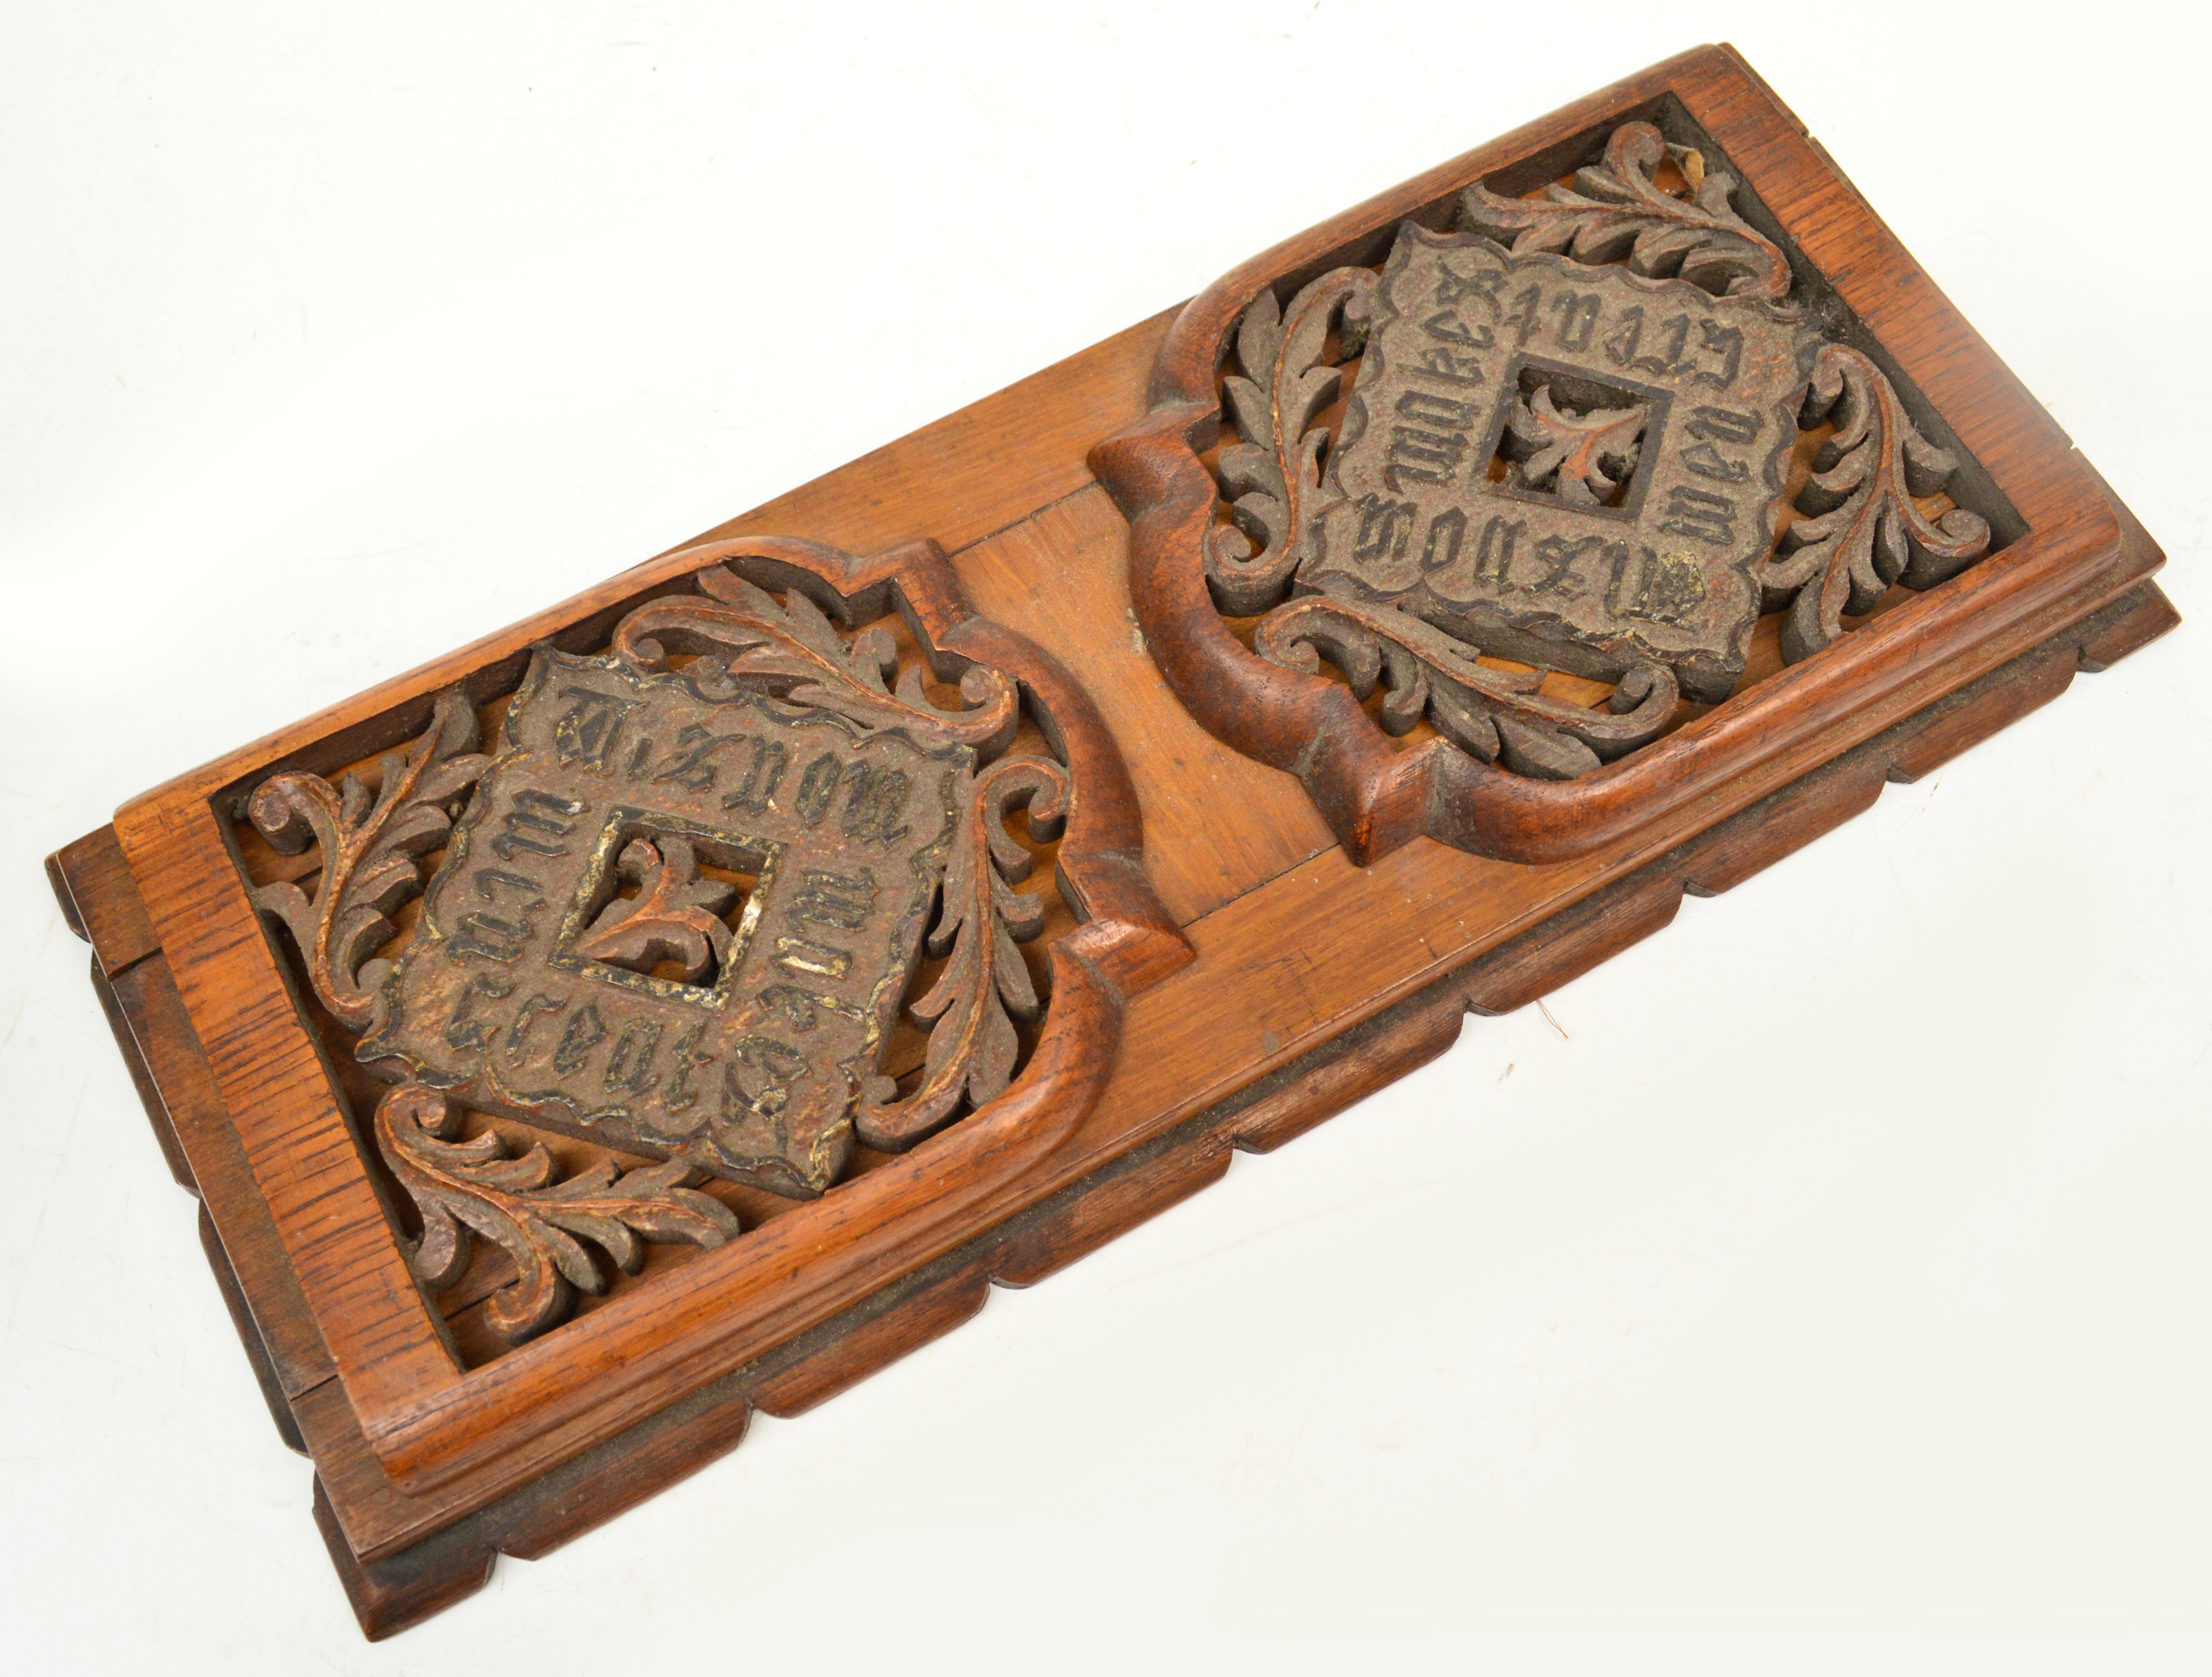 An early 20th century oak bookslide with carved and pierced flaps, the flaps inscribed "Wisdom Makes